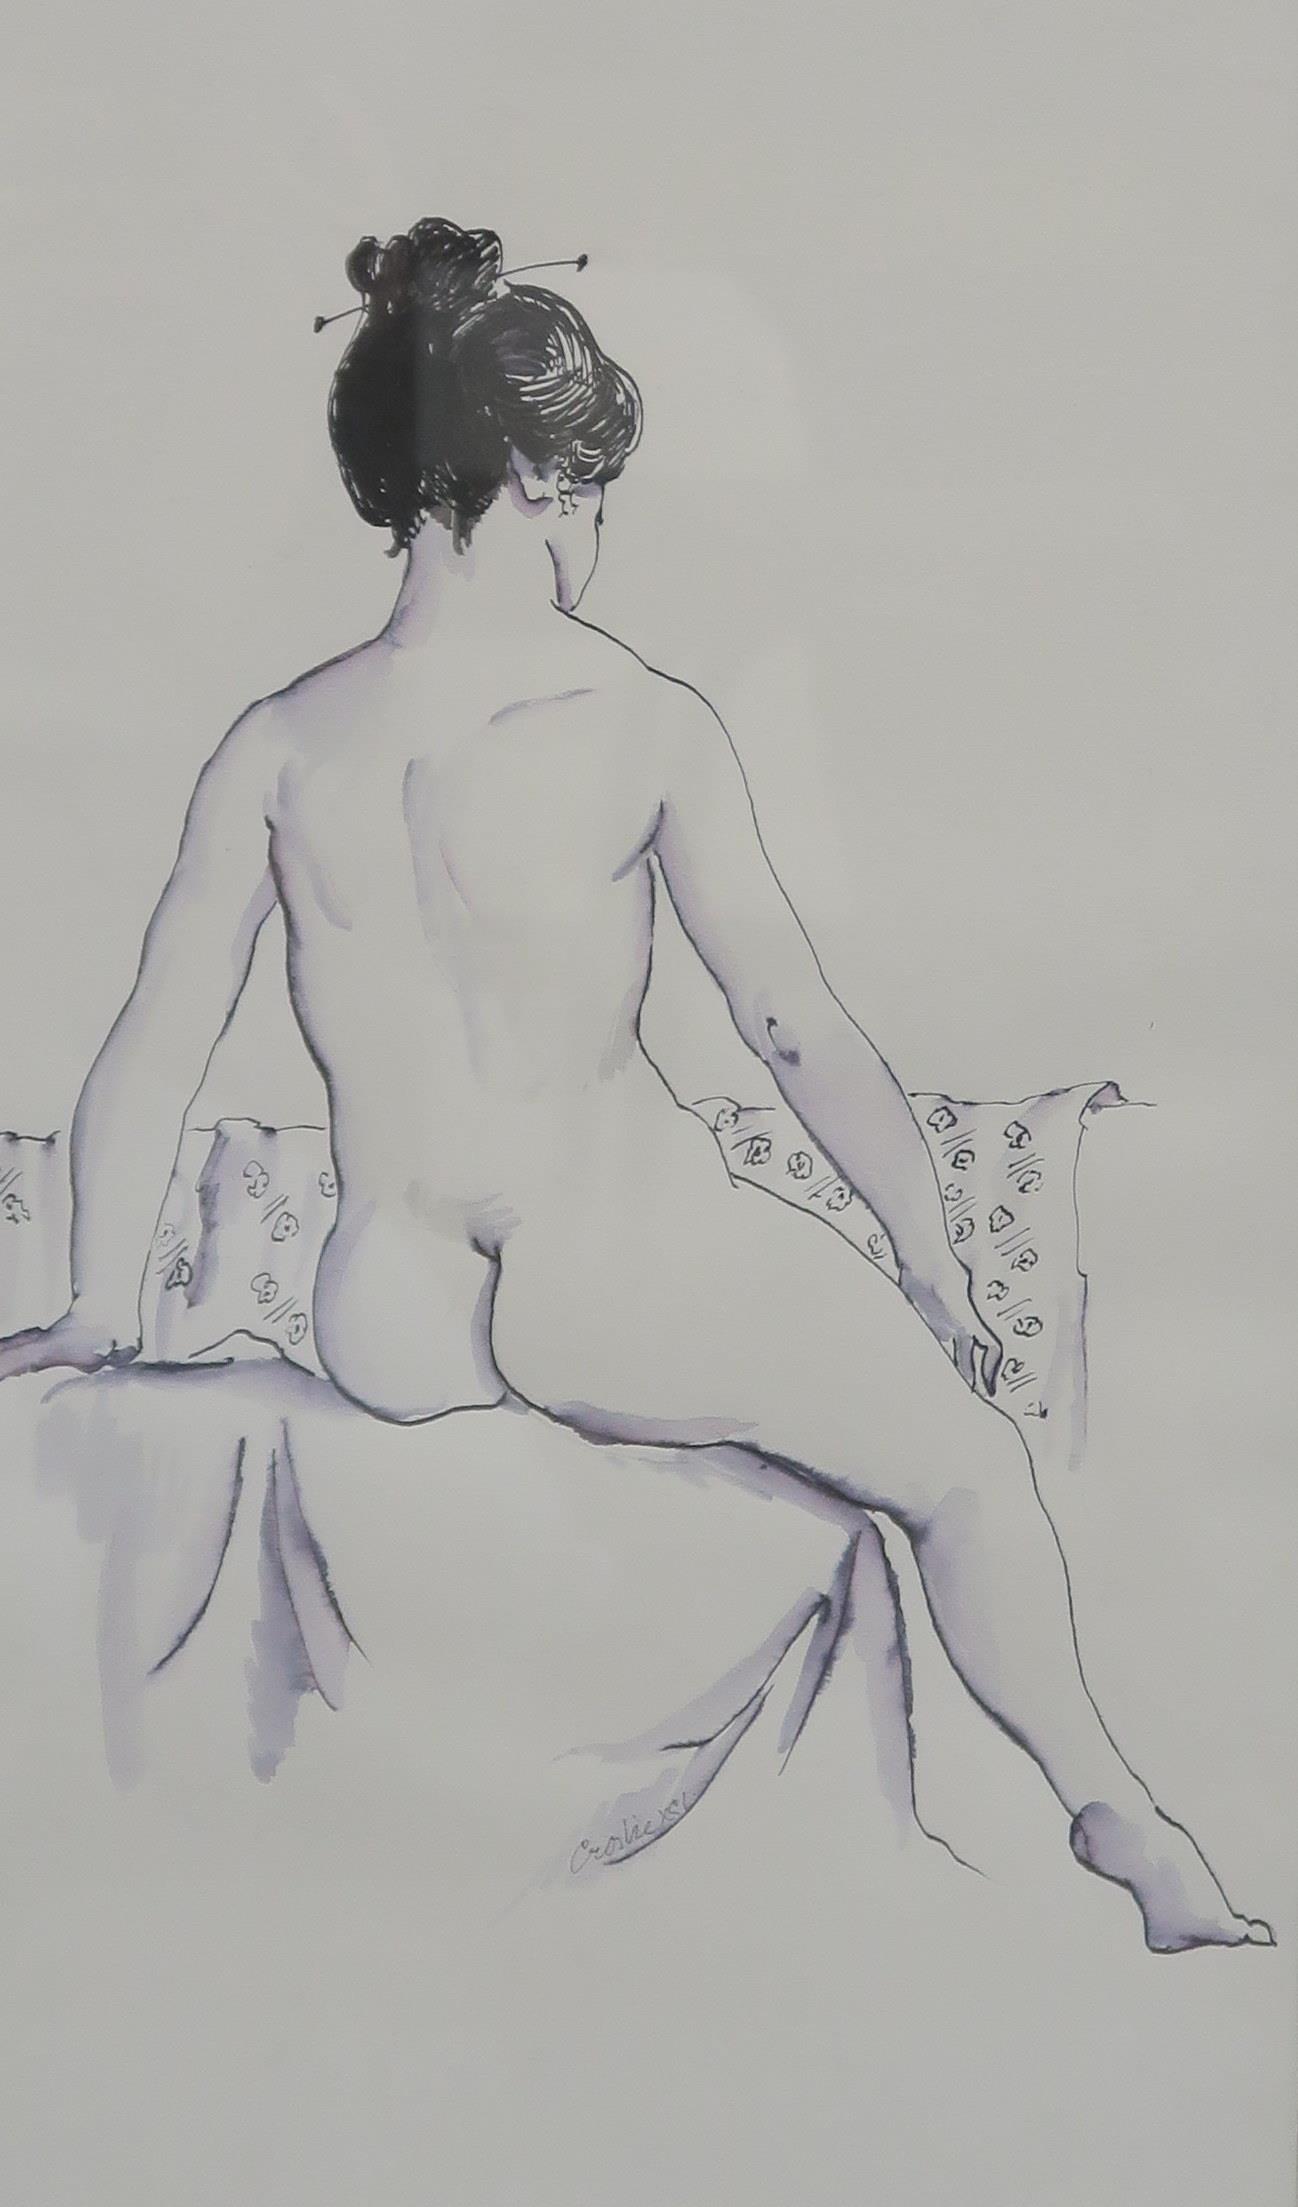 WILLIAM CROSBIE RSA RGI (1915-1999) SEATED NUDE WITH JAPANESE PIN  Ink and wash, signed lower right,